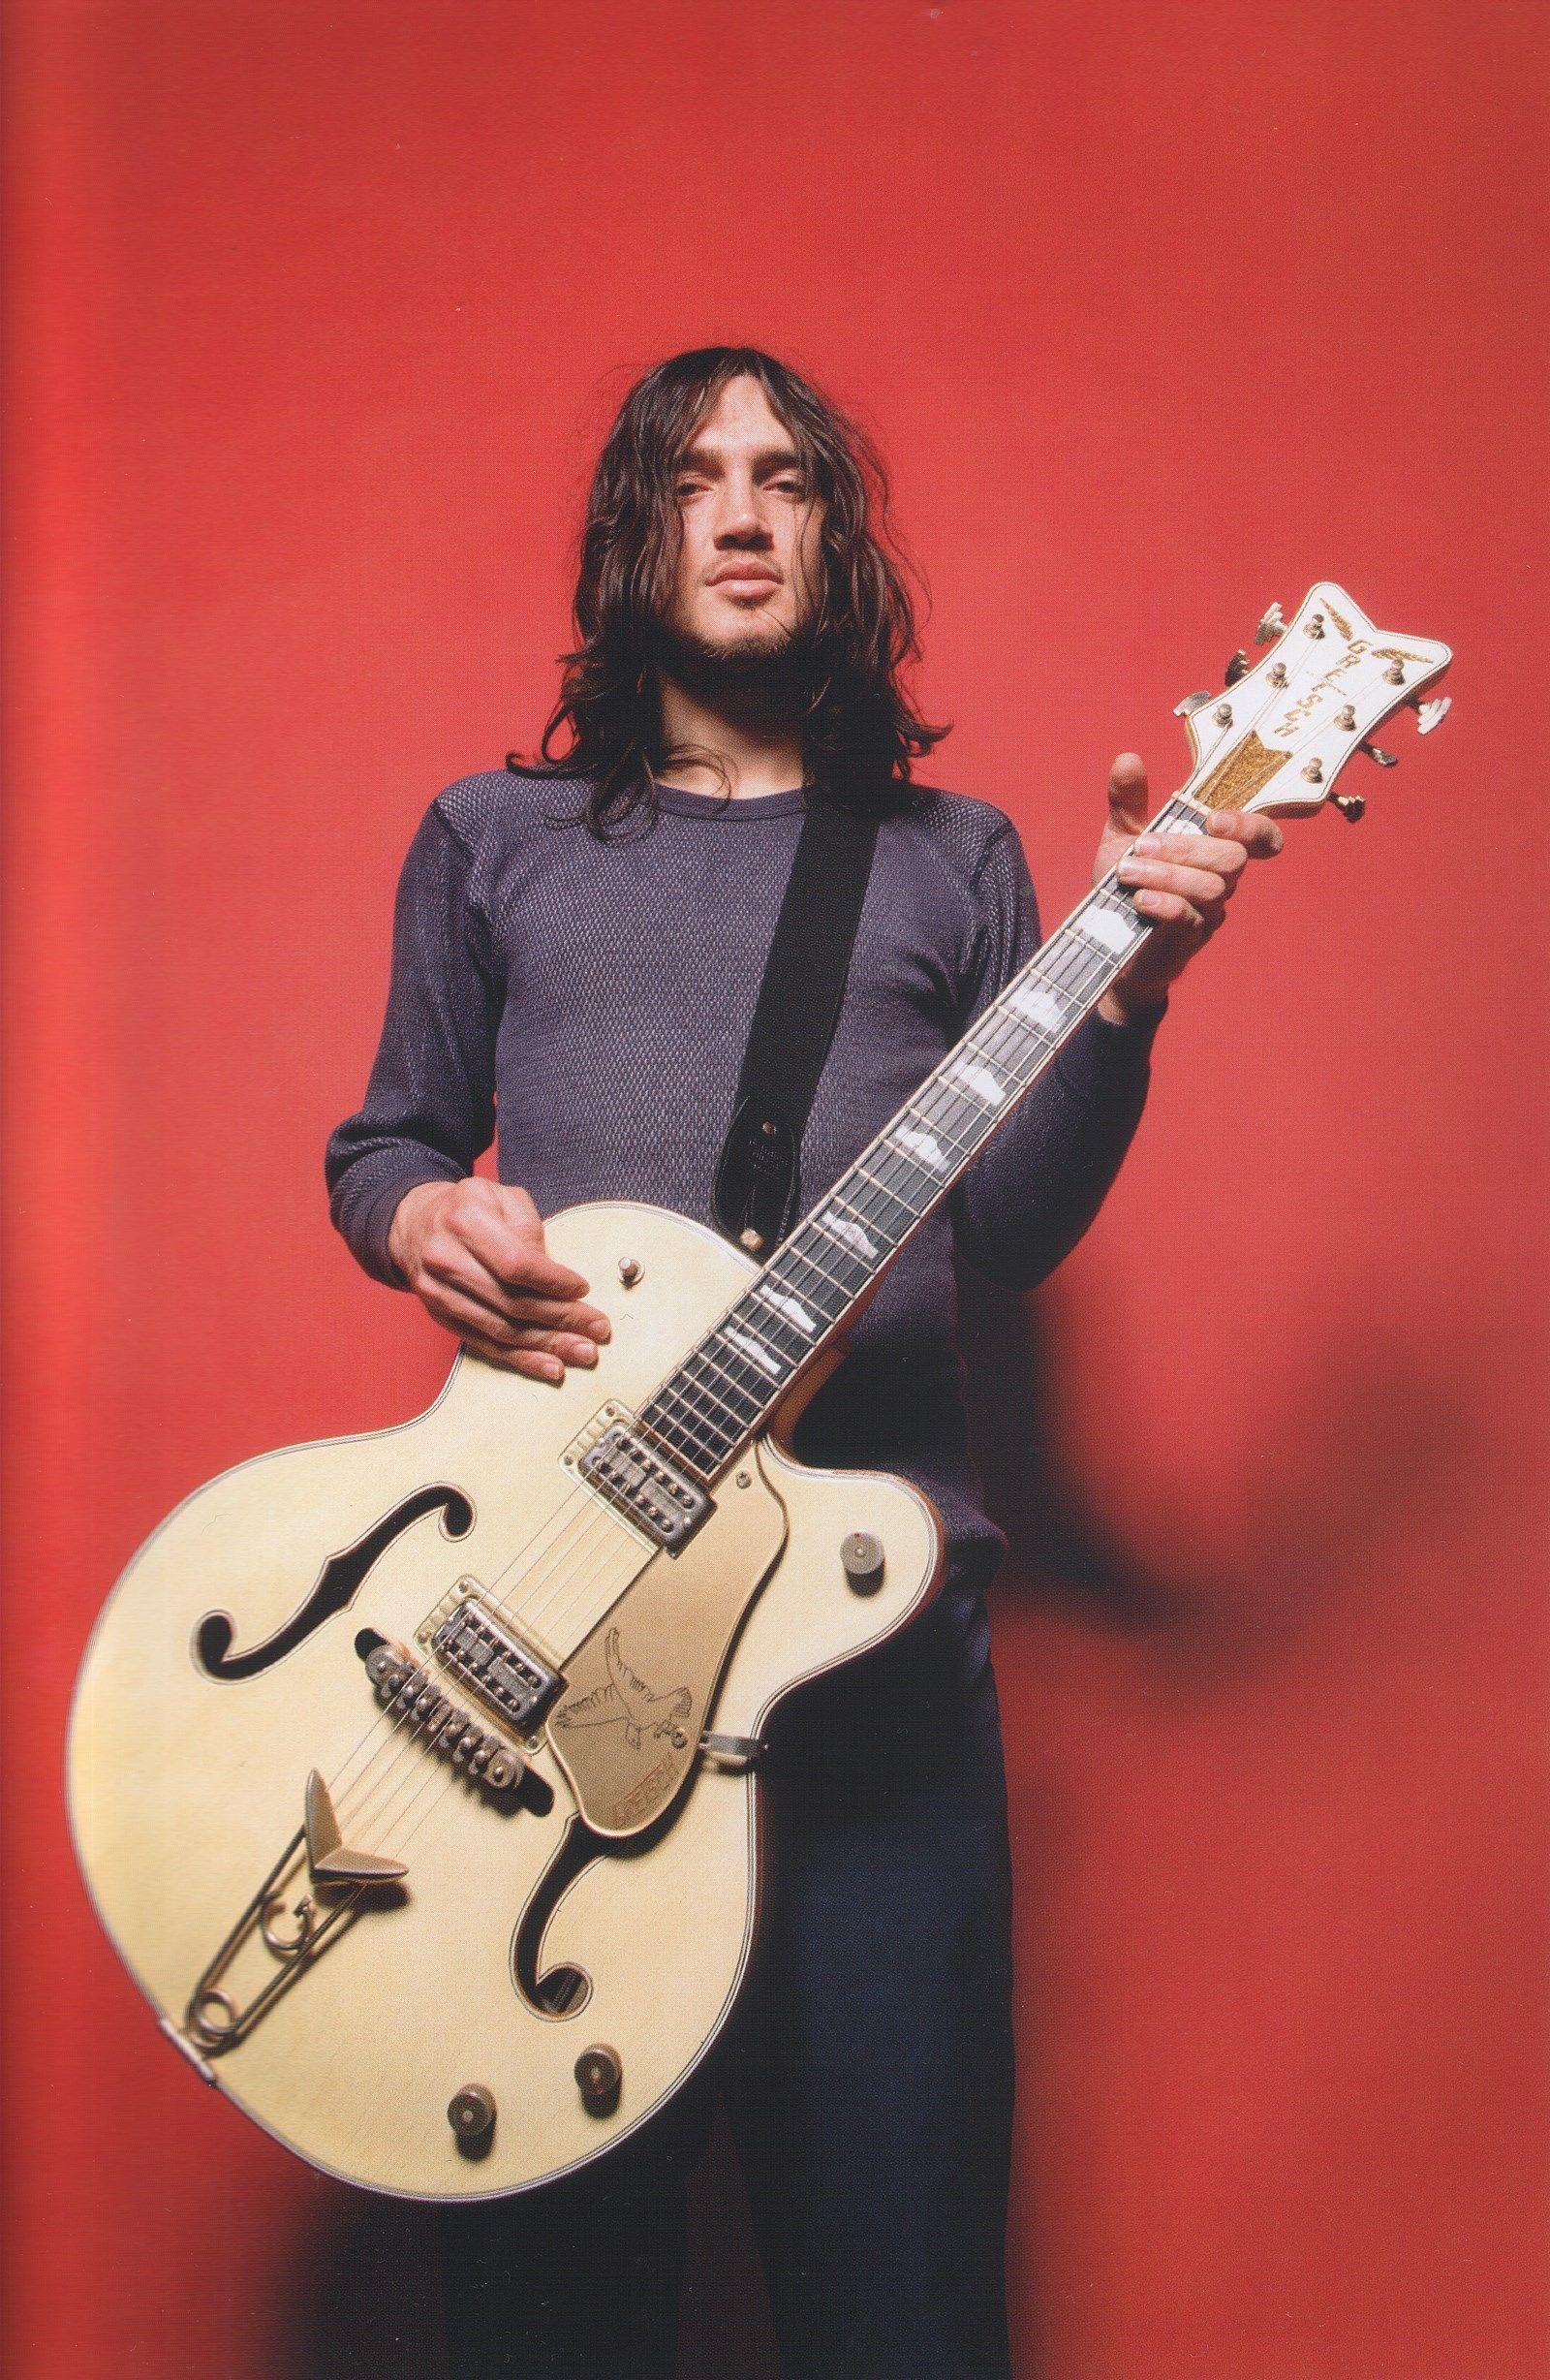 John Frusciante. Known people people news and biographies